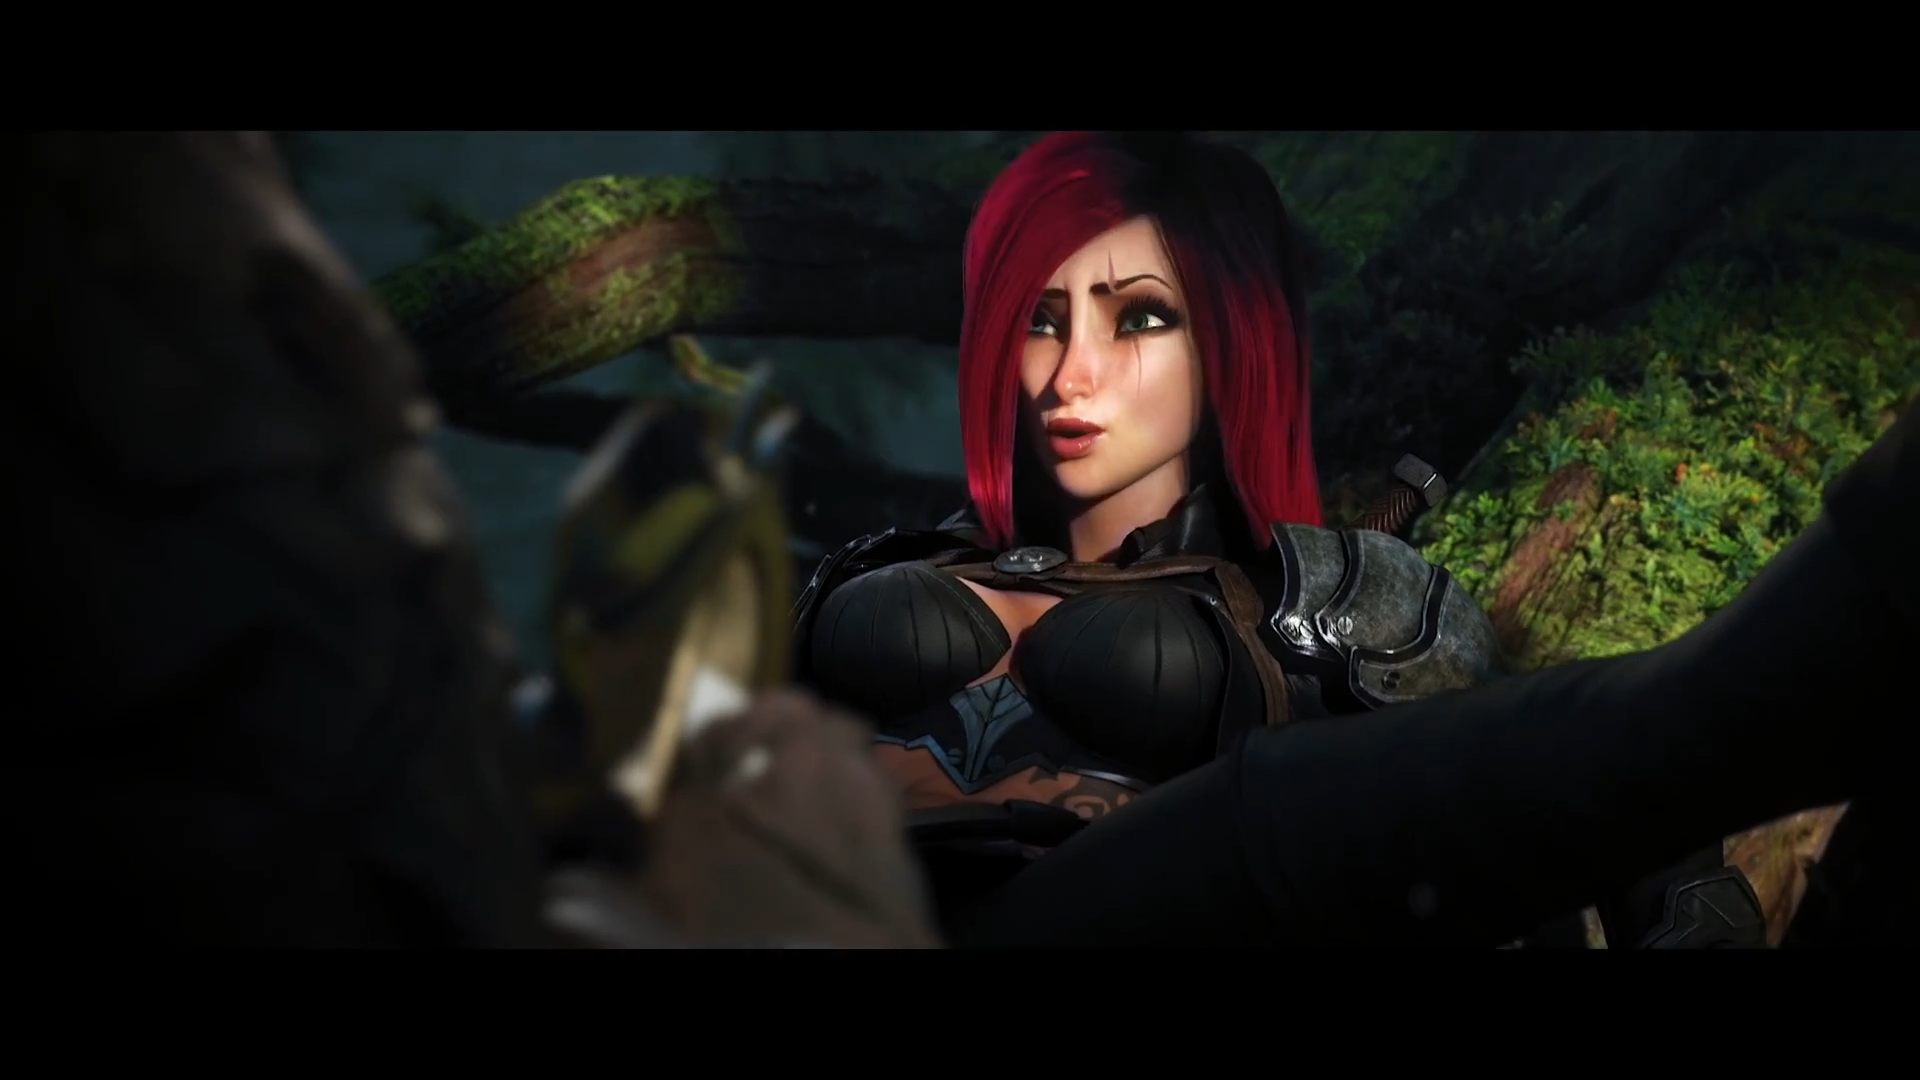 General 1920x1080 League of Legends animated movies spread legs Katarina (League of Legends) video games redhead video game girls PC gaming fantasy girl bra black bras red lipstick video game characters Rengar (League Of Legends)